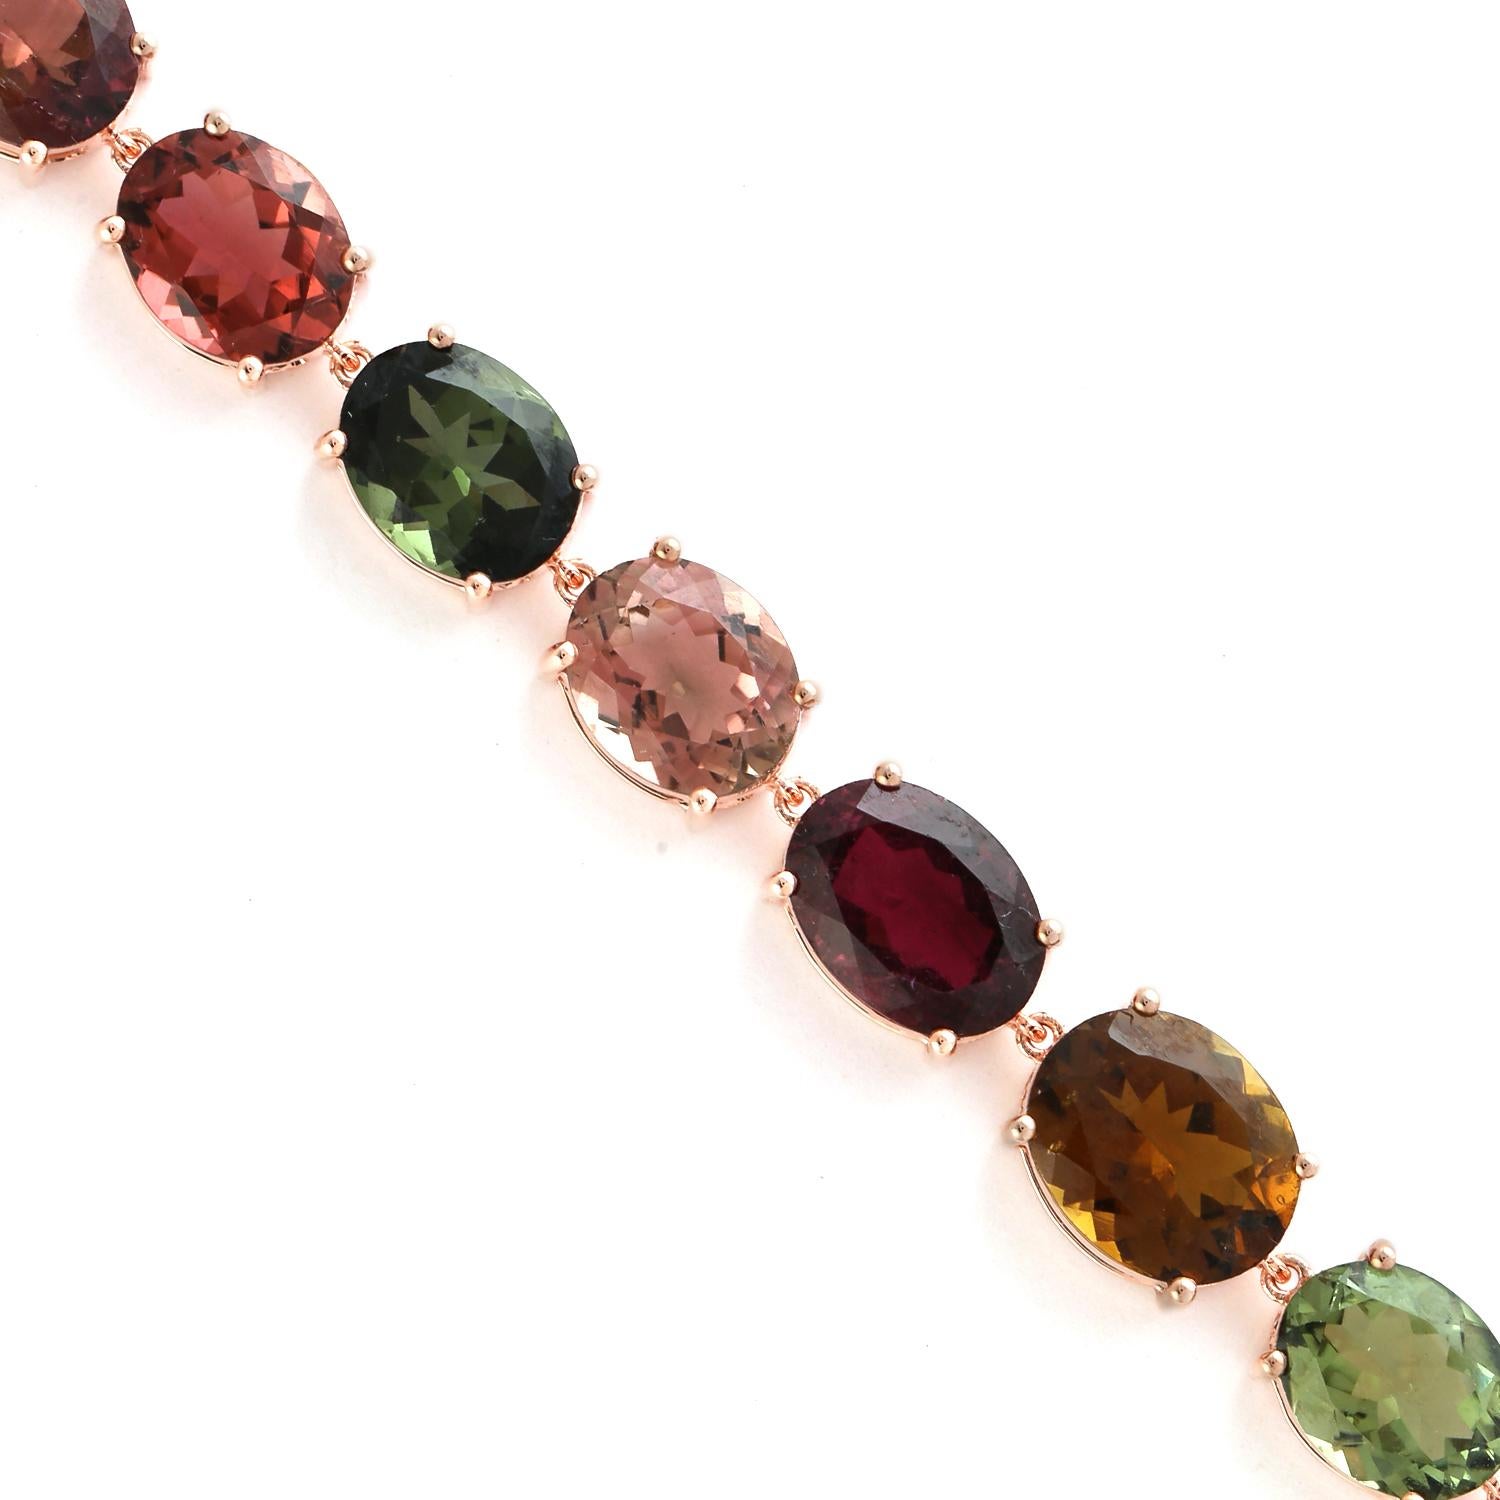 Mixed Cut 42.86 ct Multicolor Tourmaline Bracelet Made In 18k Gold For Sale